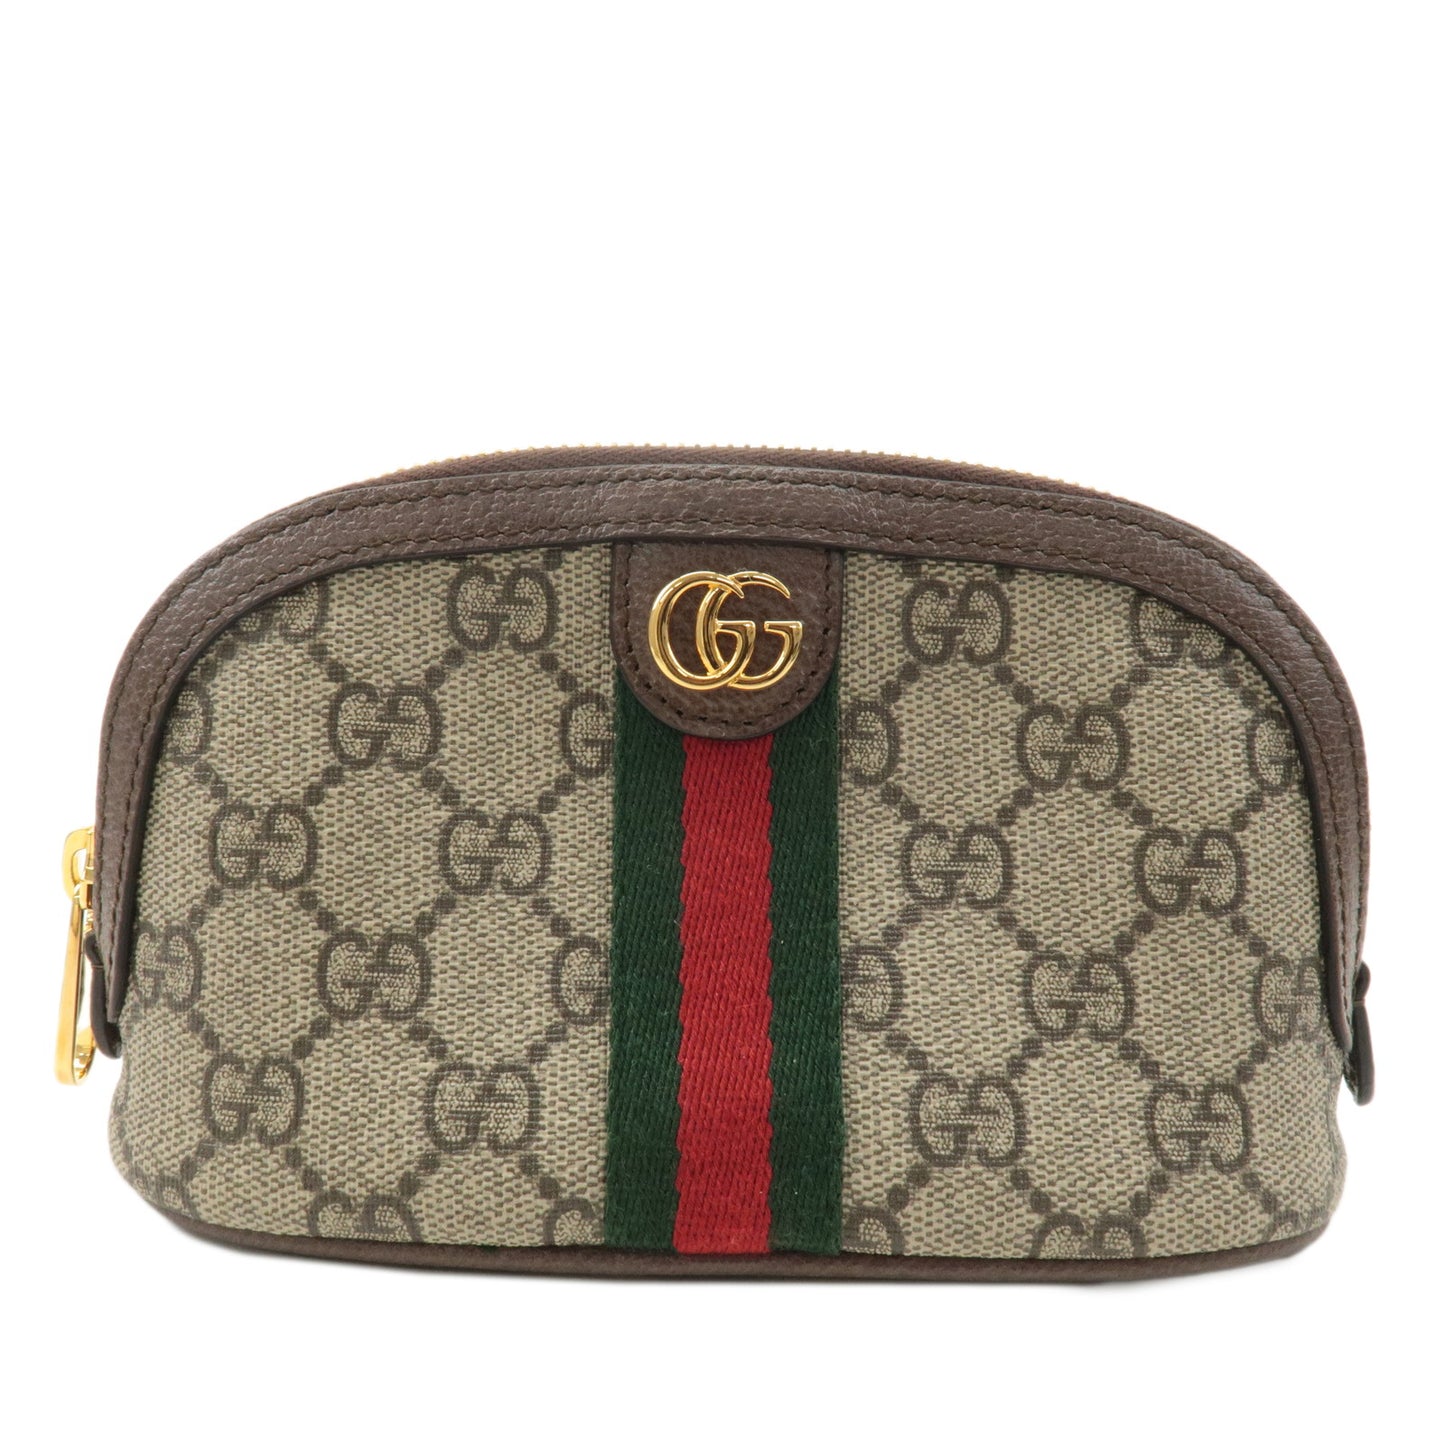 GUCCI-Ophidia-GG-Supreme-Leather-Cosmetic-Pouch-Beige-Brown-625550